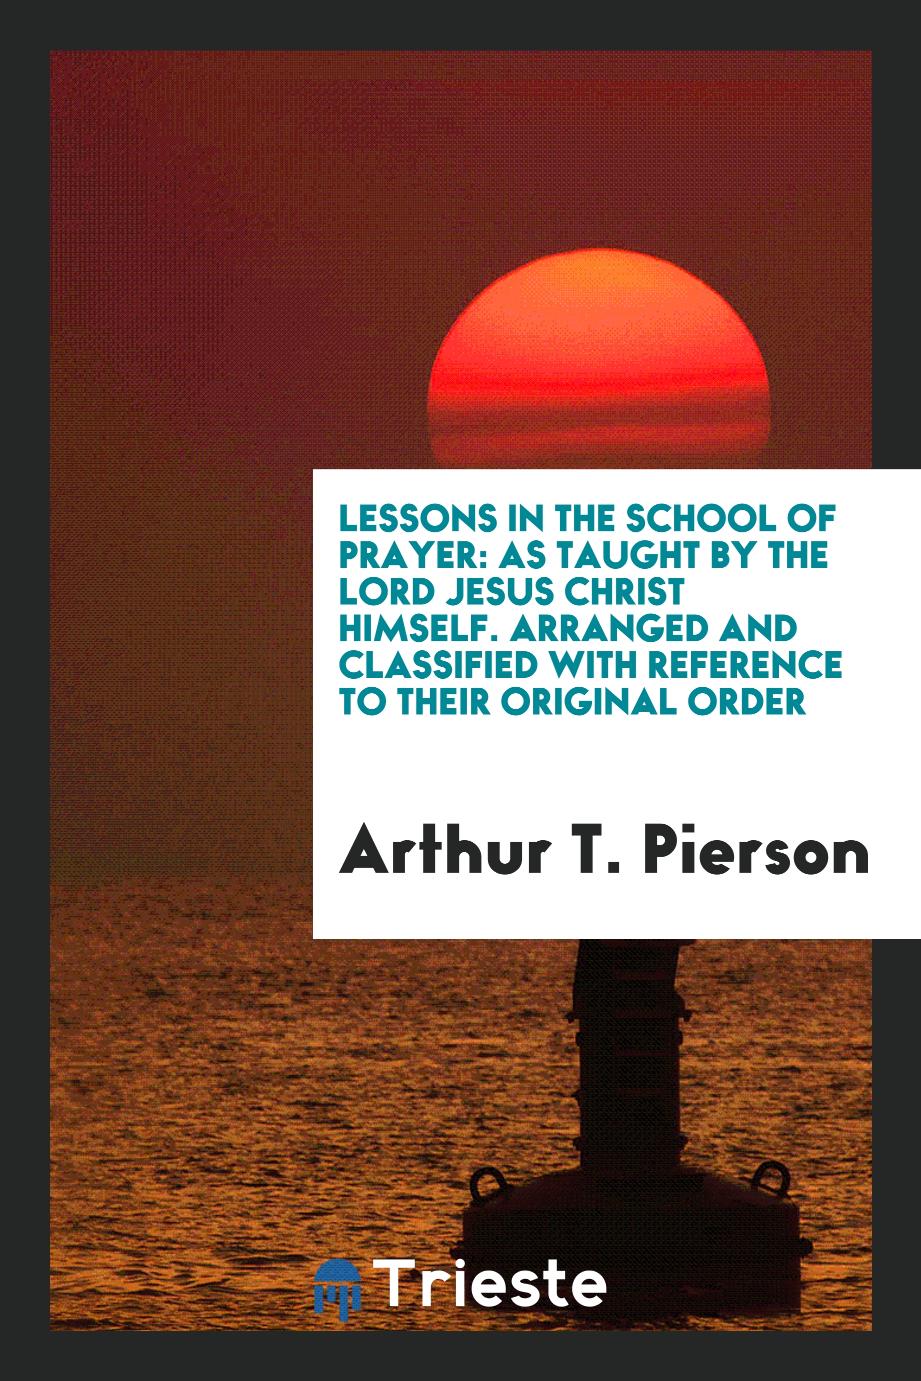 Lessons in the school of prayer: as taught by the Lord Jesus Christ Himself. Arranged and classified with reference to their original order